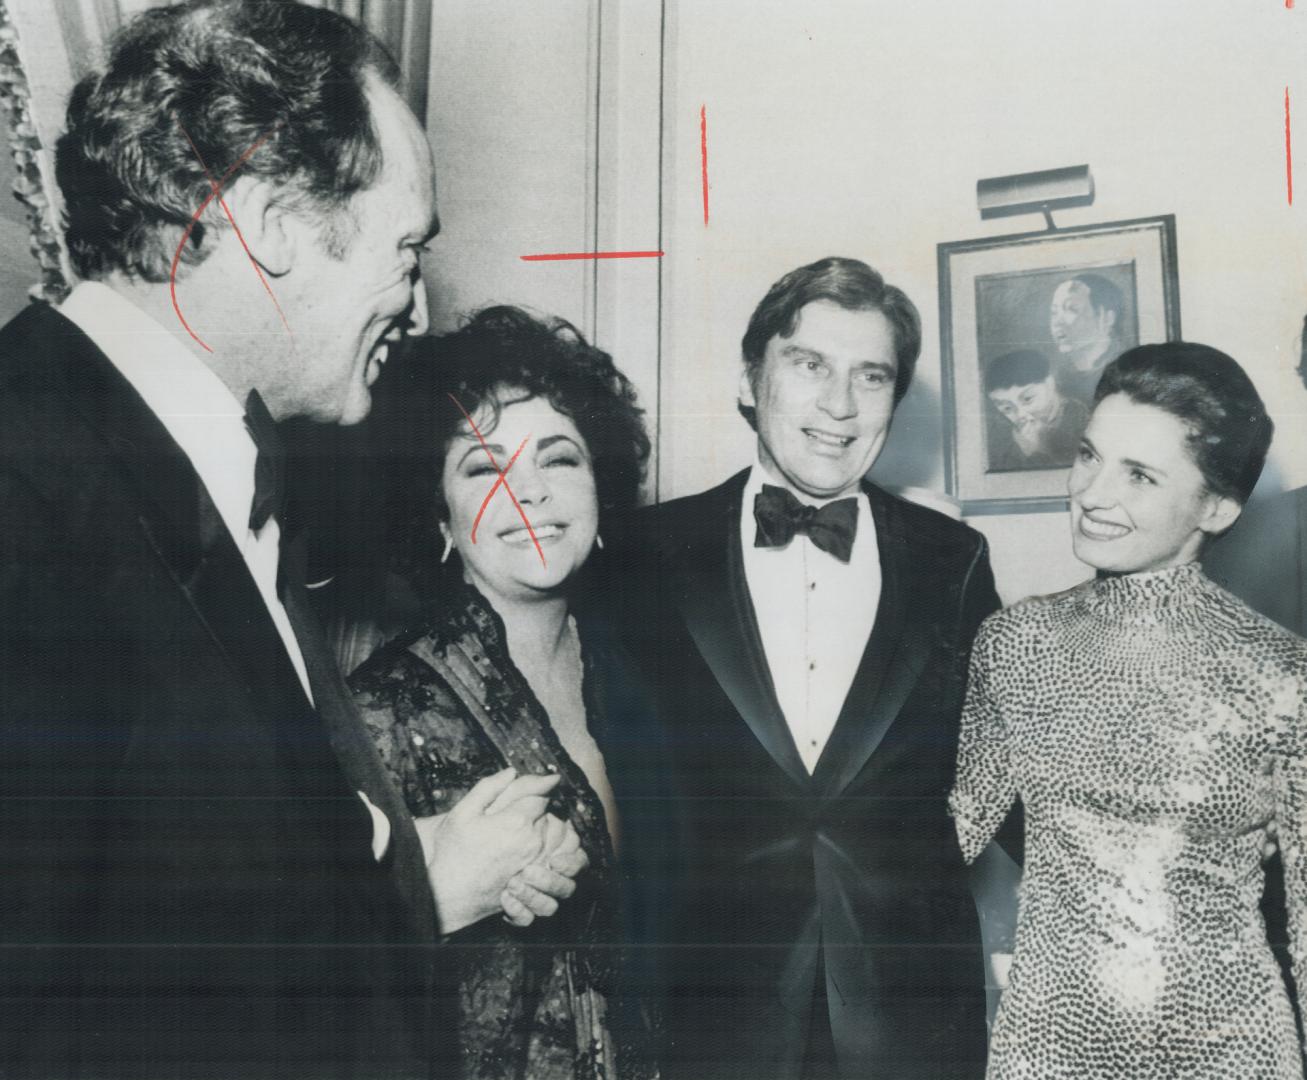 Dazzling in a skintight sequinned dress, Margaret Trudeau chats with John Warner, husband of actress Elizabeth Taylor, during reception last night at Canadian Embassy in Washington